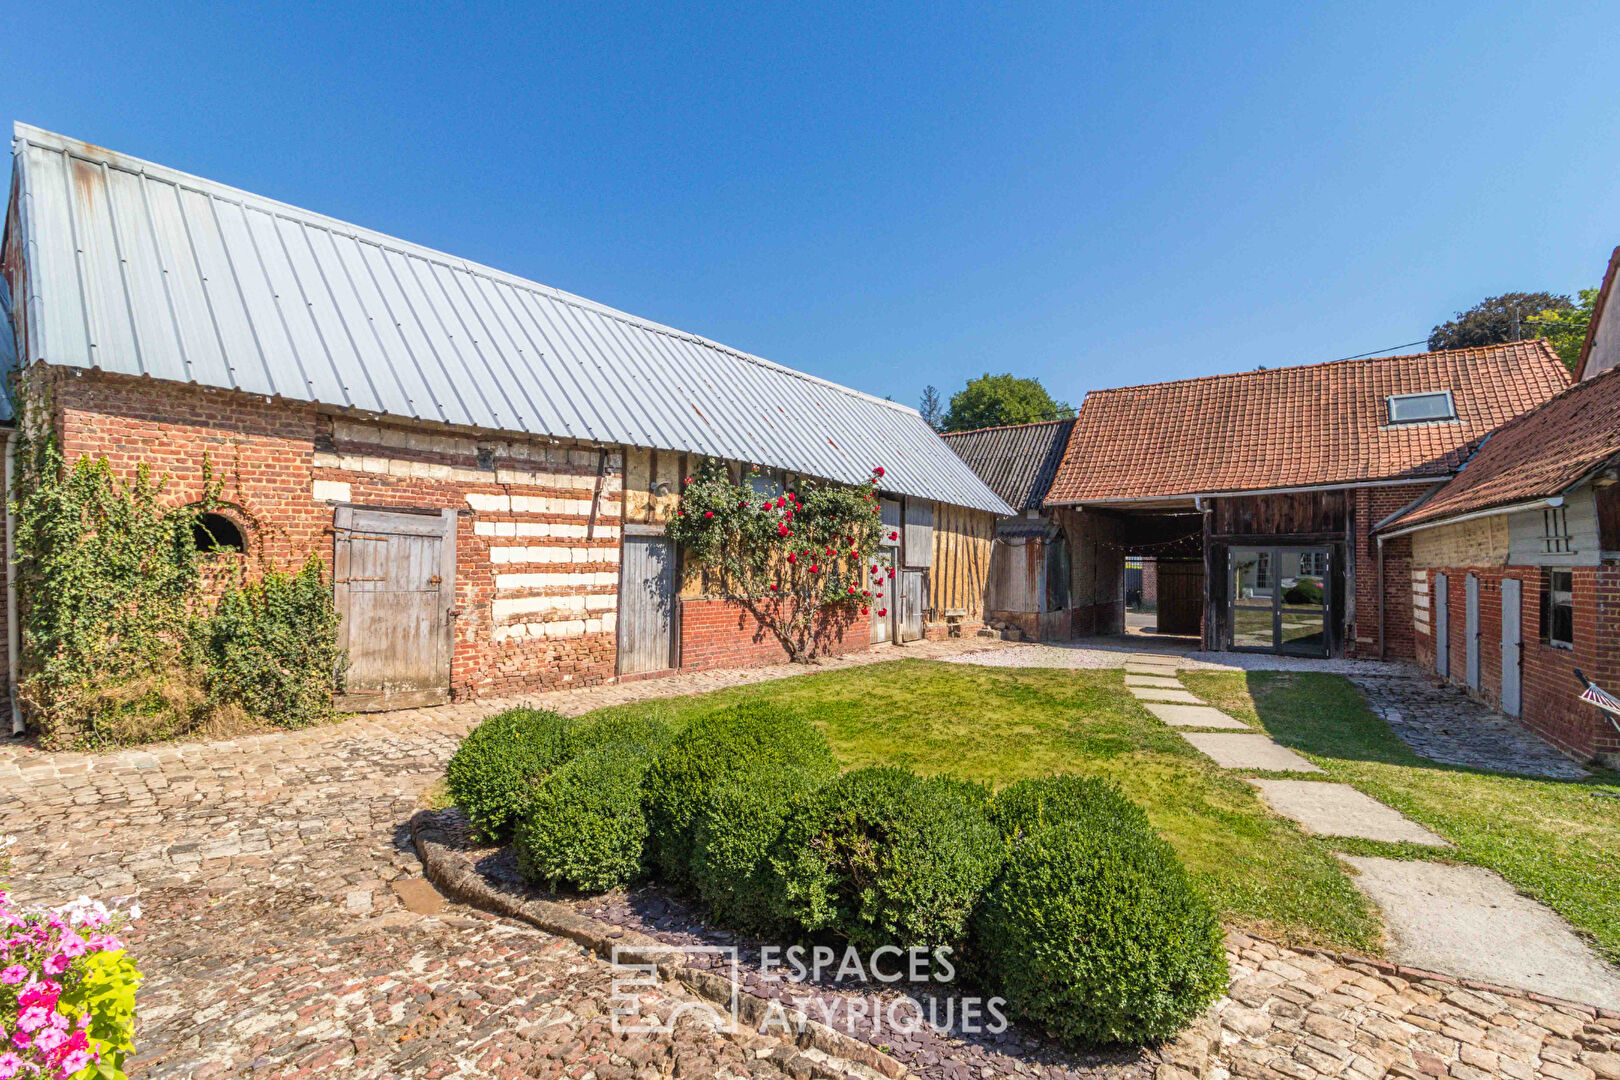 A corner of paradise-  Beautiful family farmhouse, renovated and out of sight